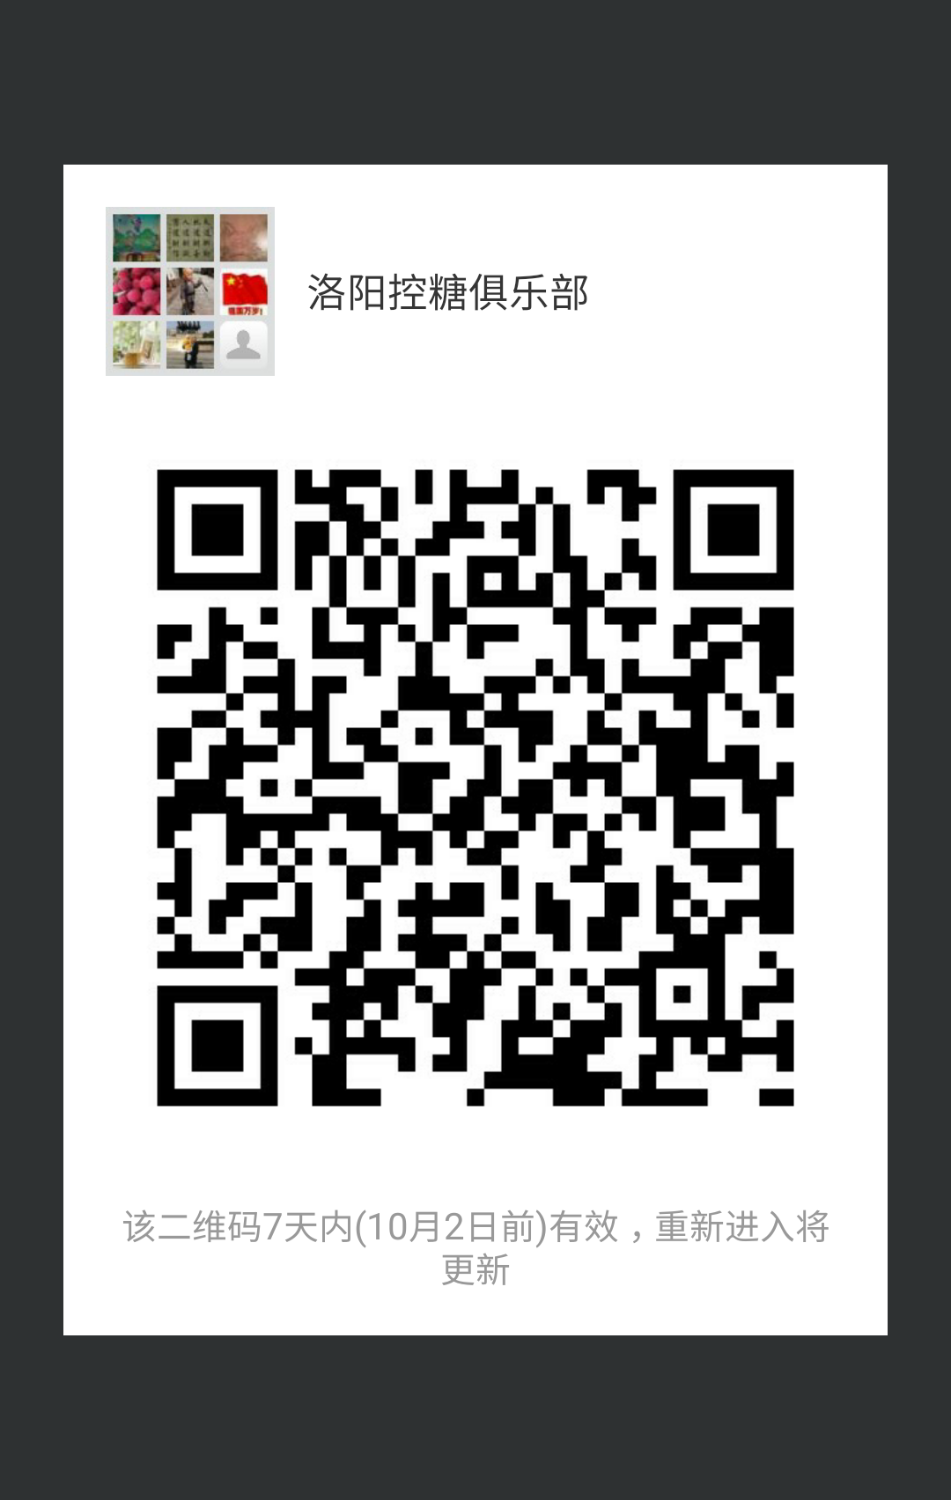 mmqrcode1537822239495.png